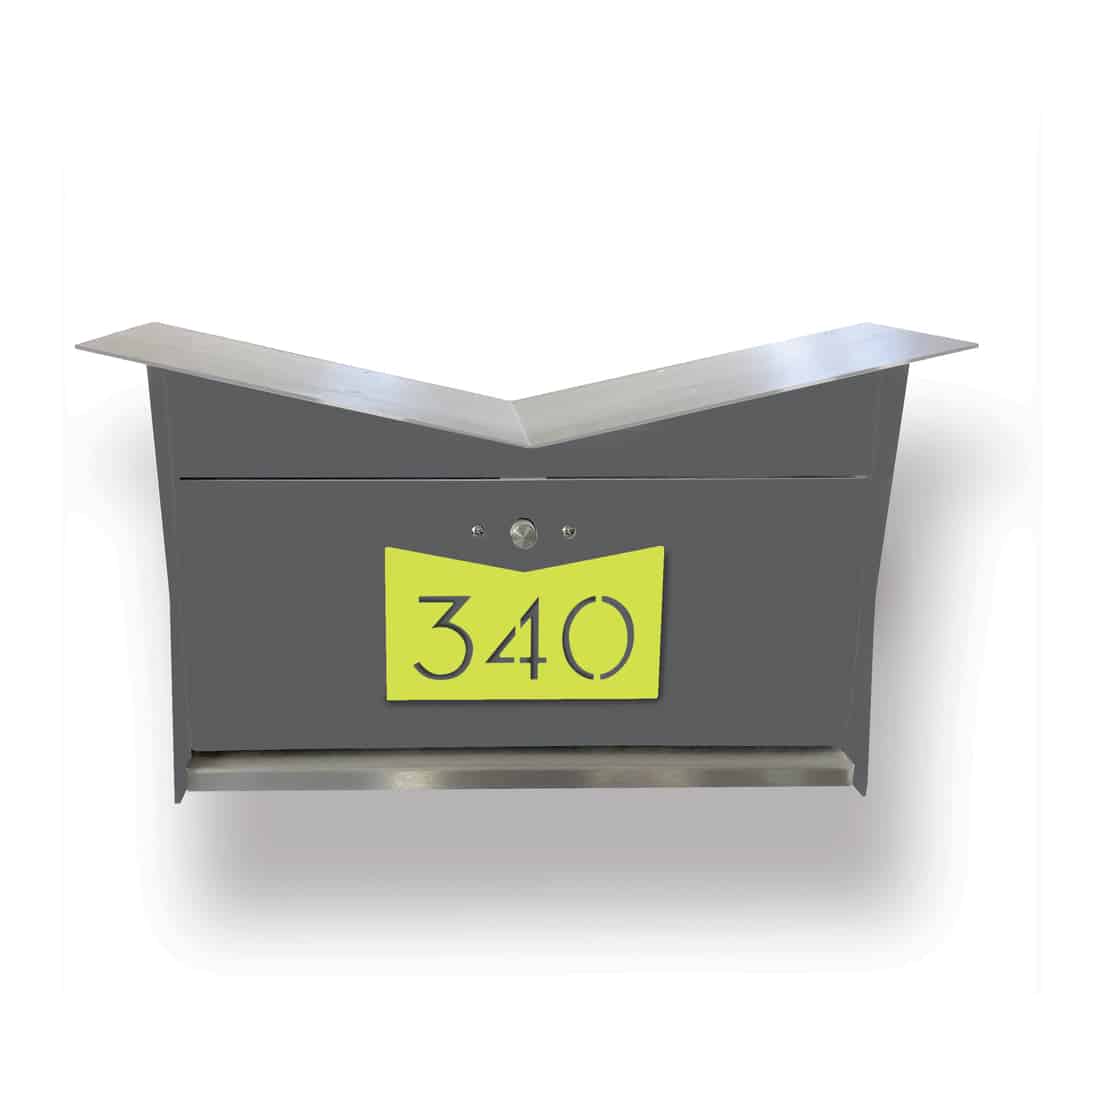 Butterfly Box in Designer Gray – Wall Mount Mailbox Product Image